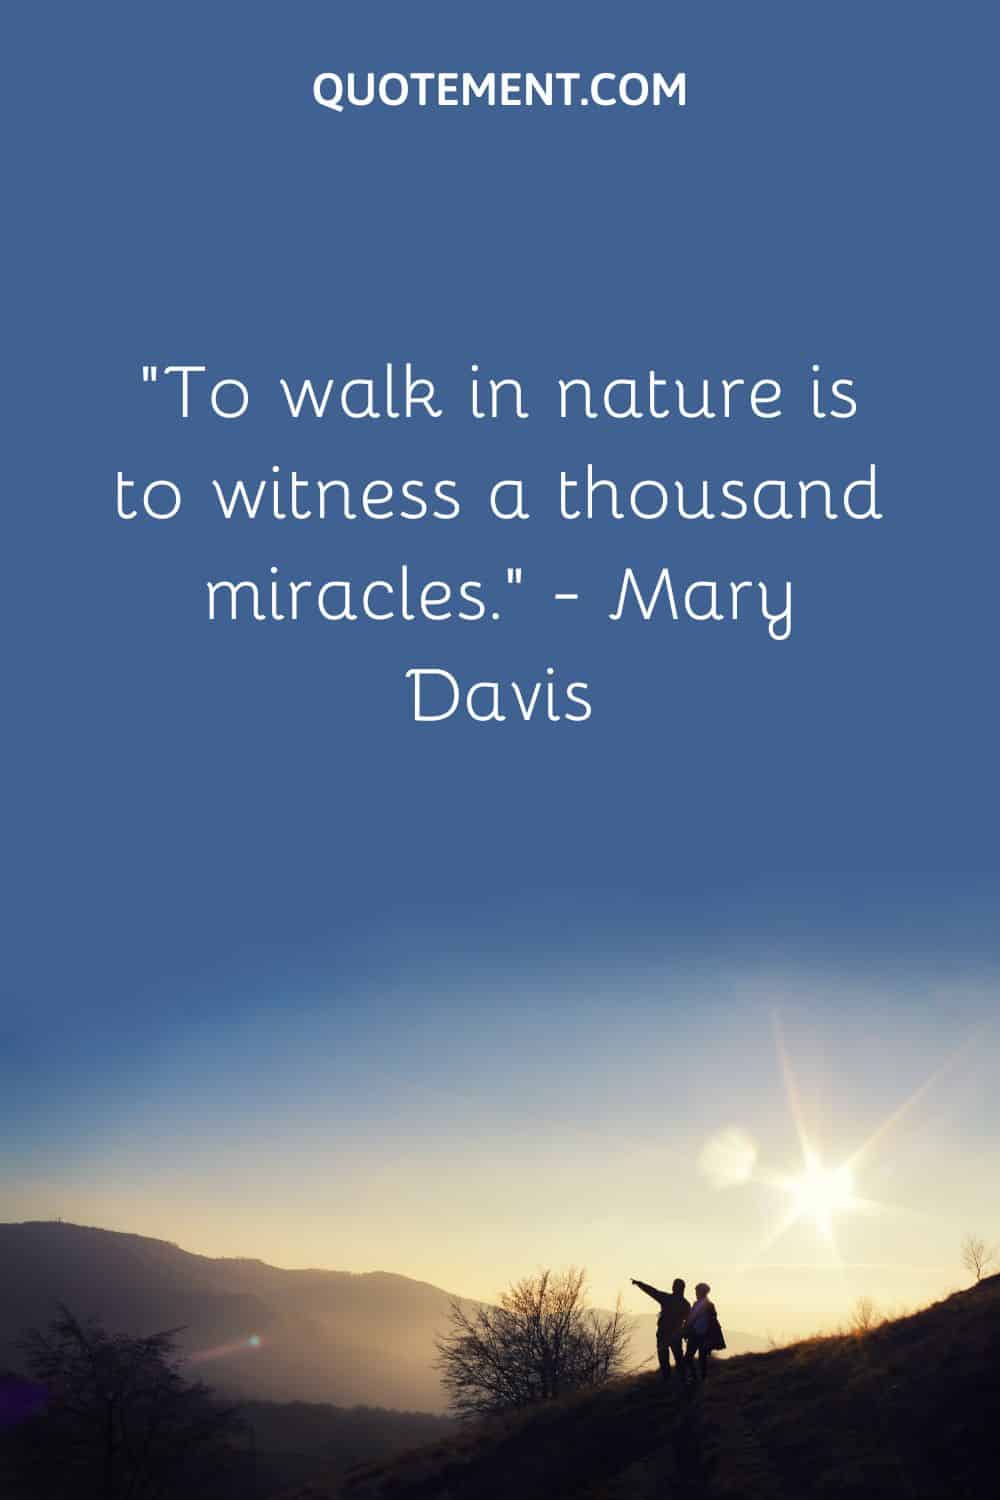 “To walk in nature is to witness a thousand miracles.” — Mary Davis